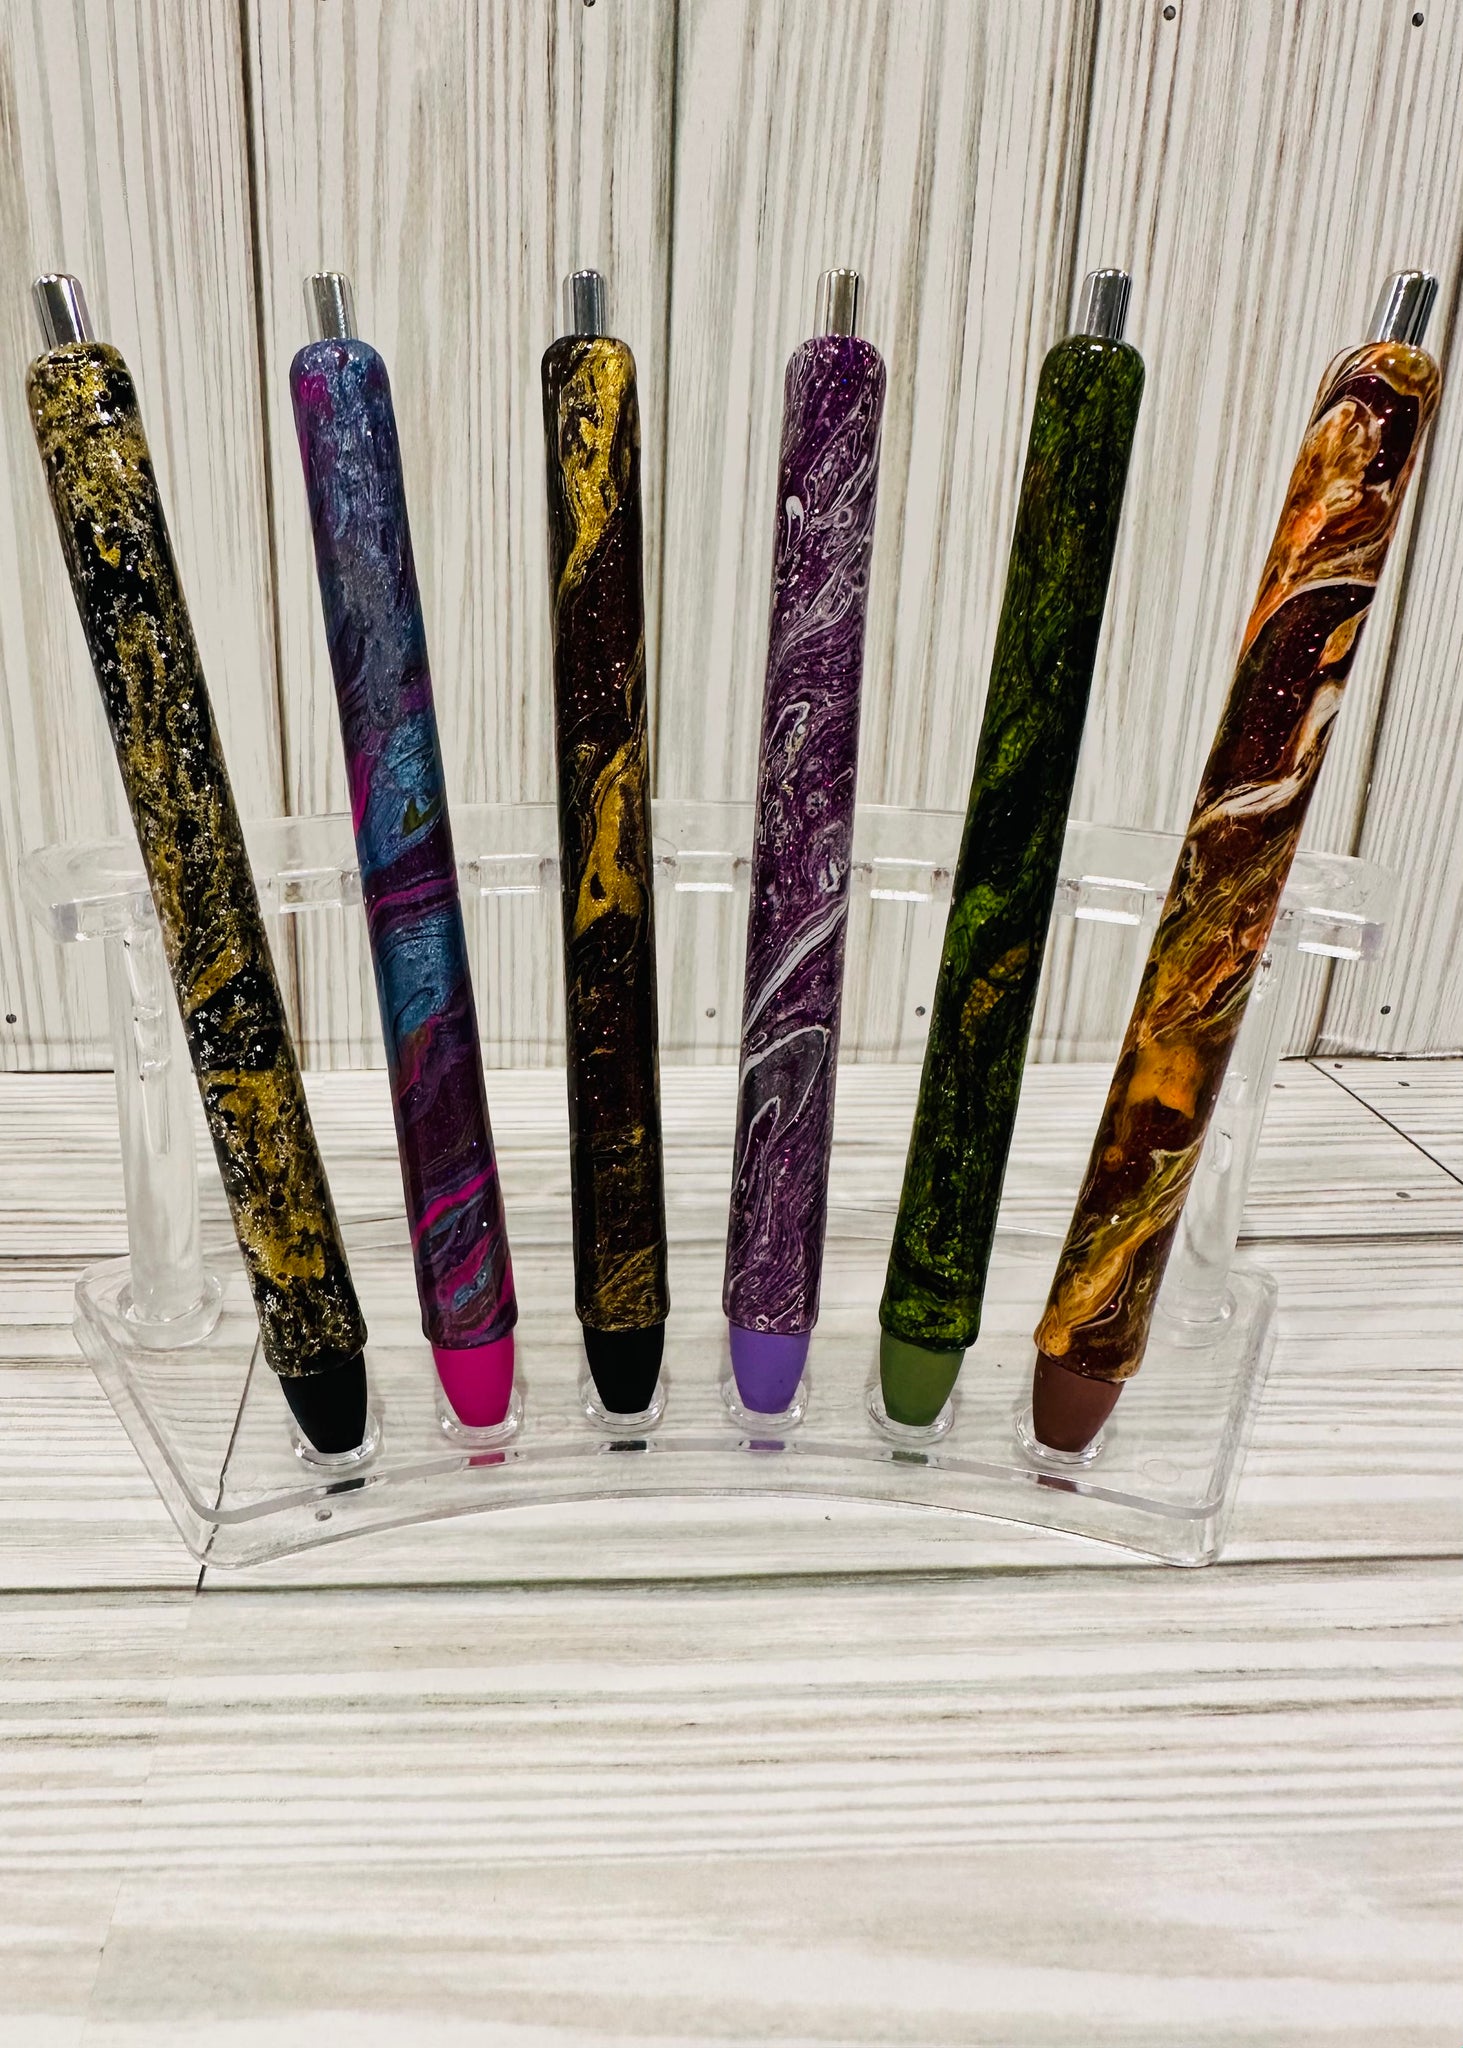 Customize your own Hydro-Dipped Pen